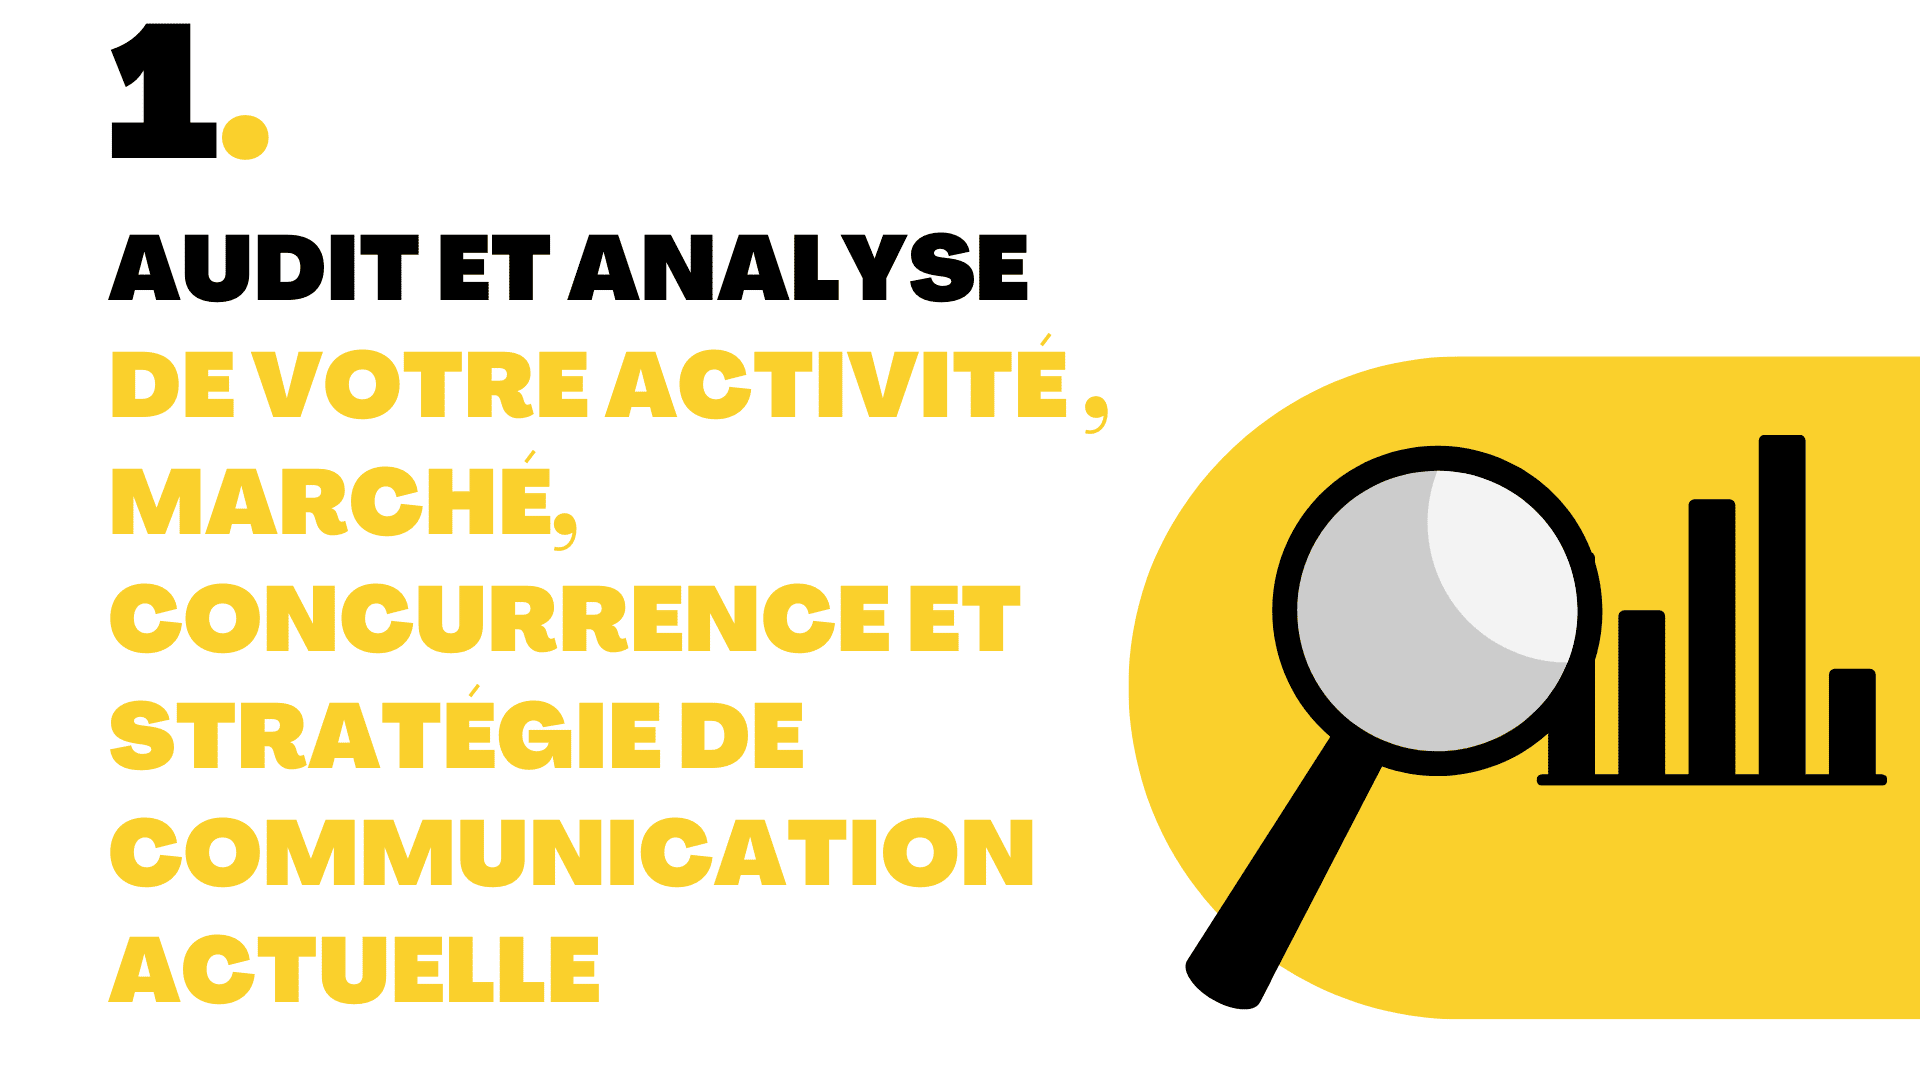 Audit analyse activité concurrence